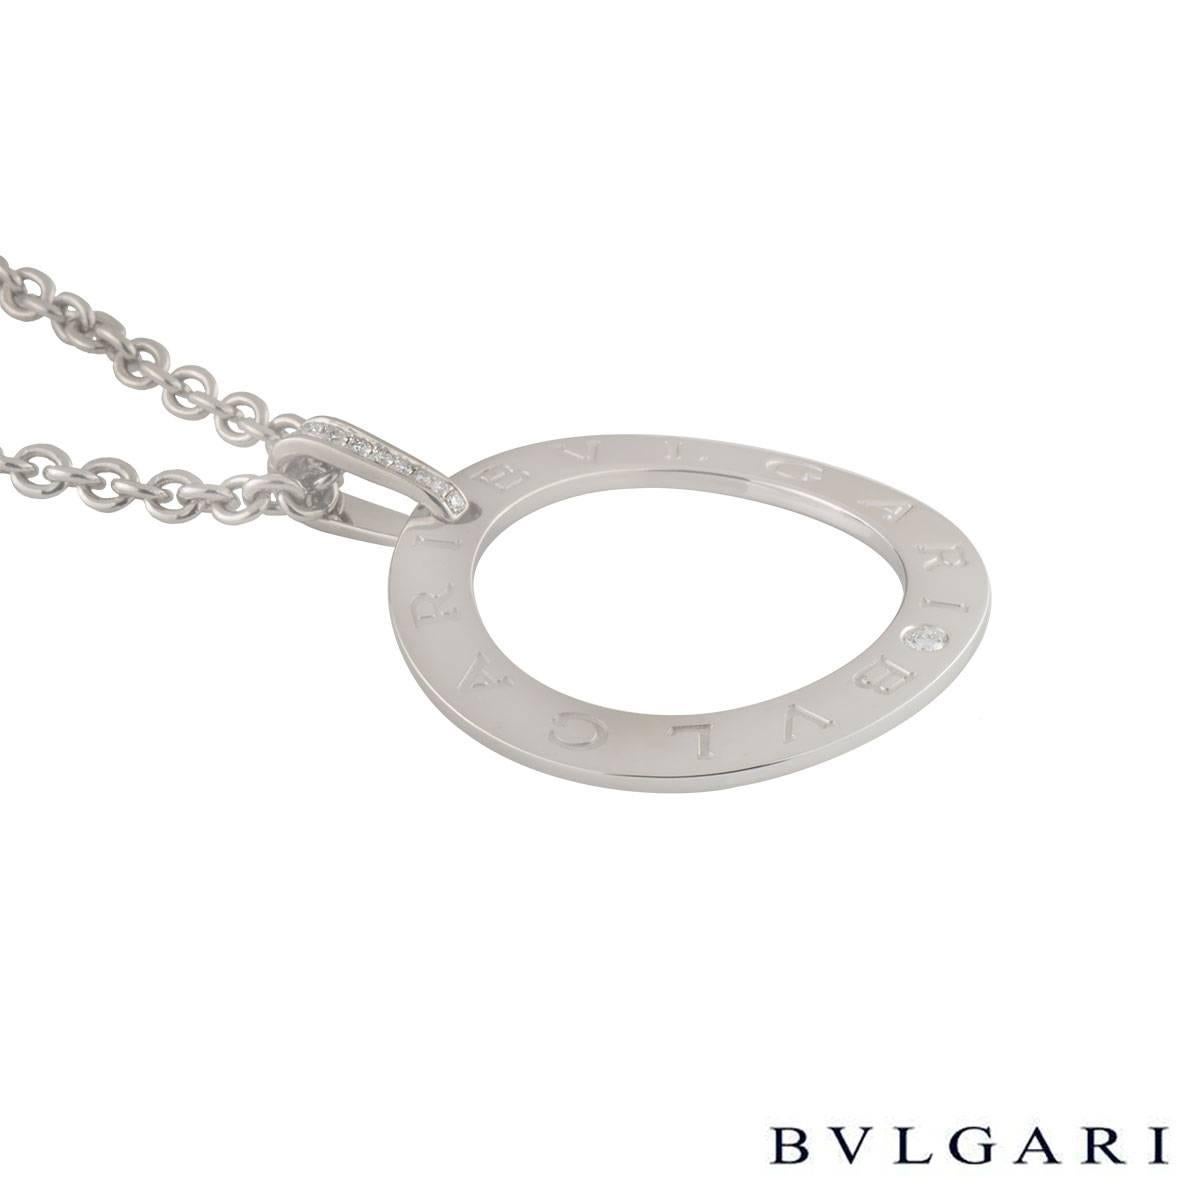 A lovely 18k white gold Bvlgari necklace from the Bvlgari Bvlgari collection. The necklace comprises of a circular openwork motif with 'Bvlgari Bvlgari' embossed around the outer edge. The necklace loop bail has 9 round brilliant cut diamonds in a